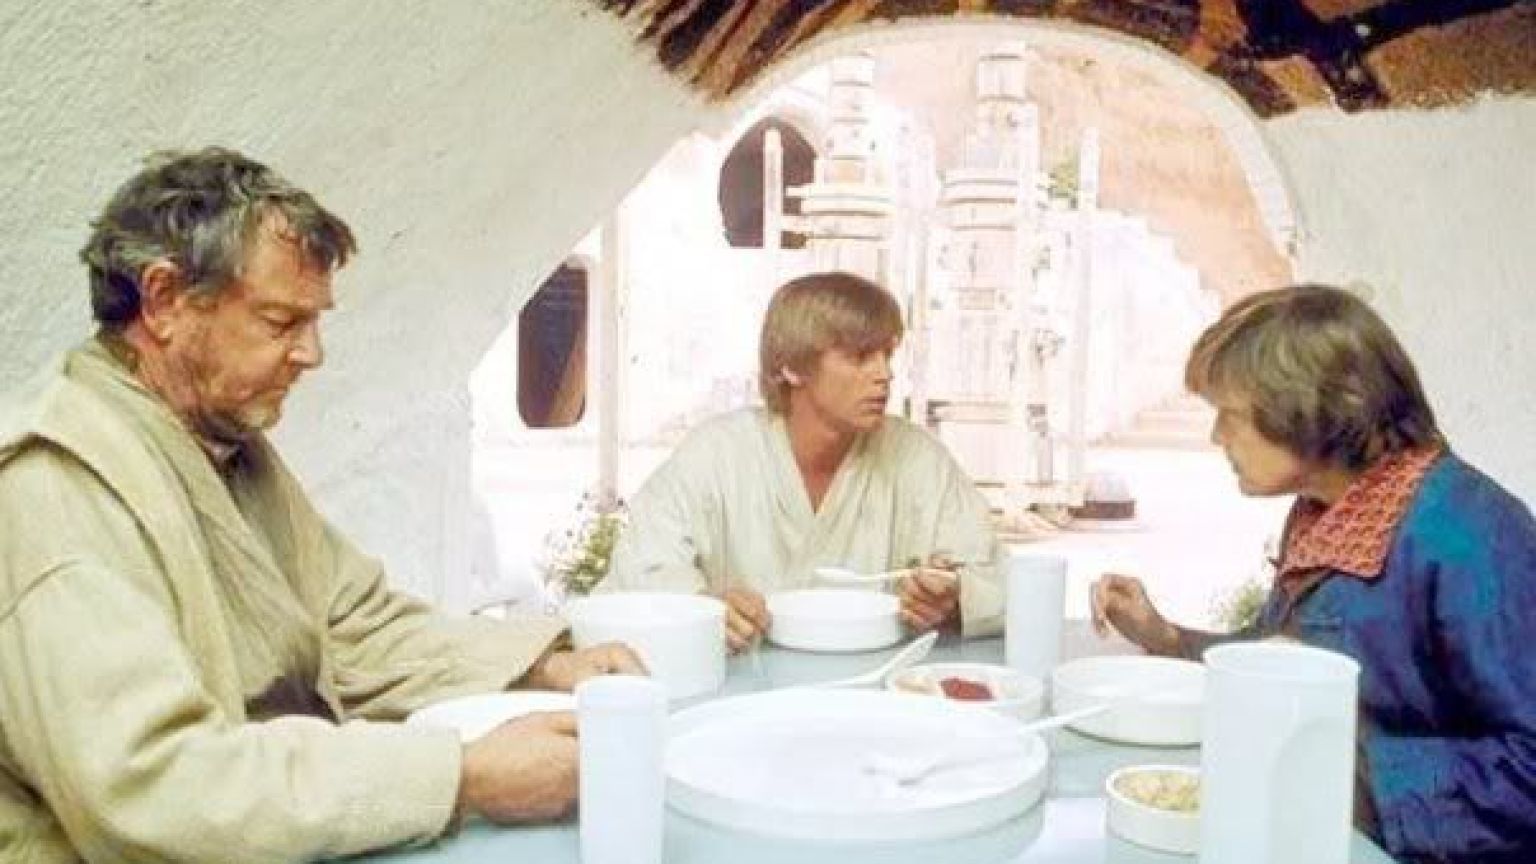 5 Ways to Incorporate Star Wars into Your Thanksgiving Gathering